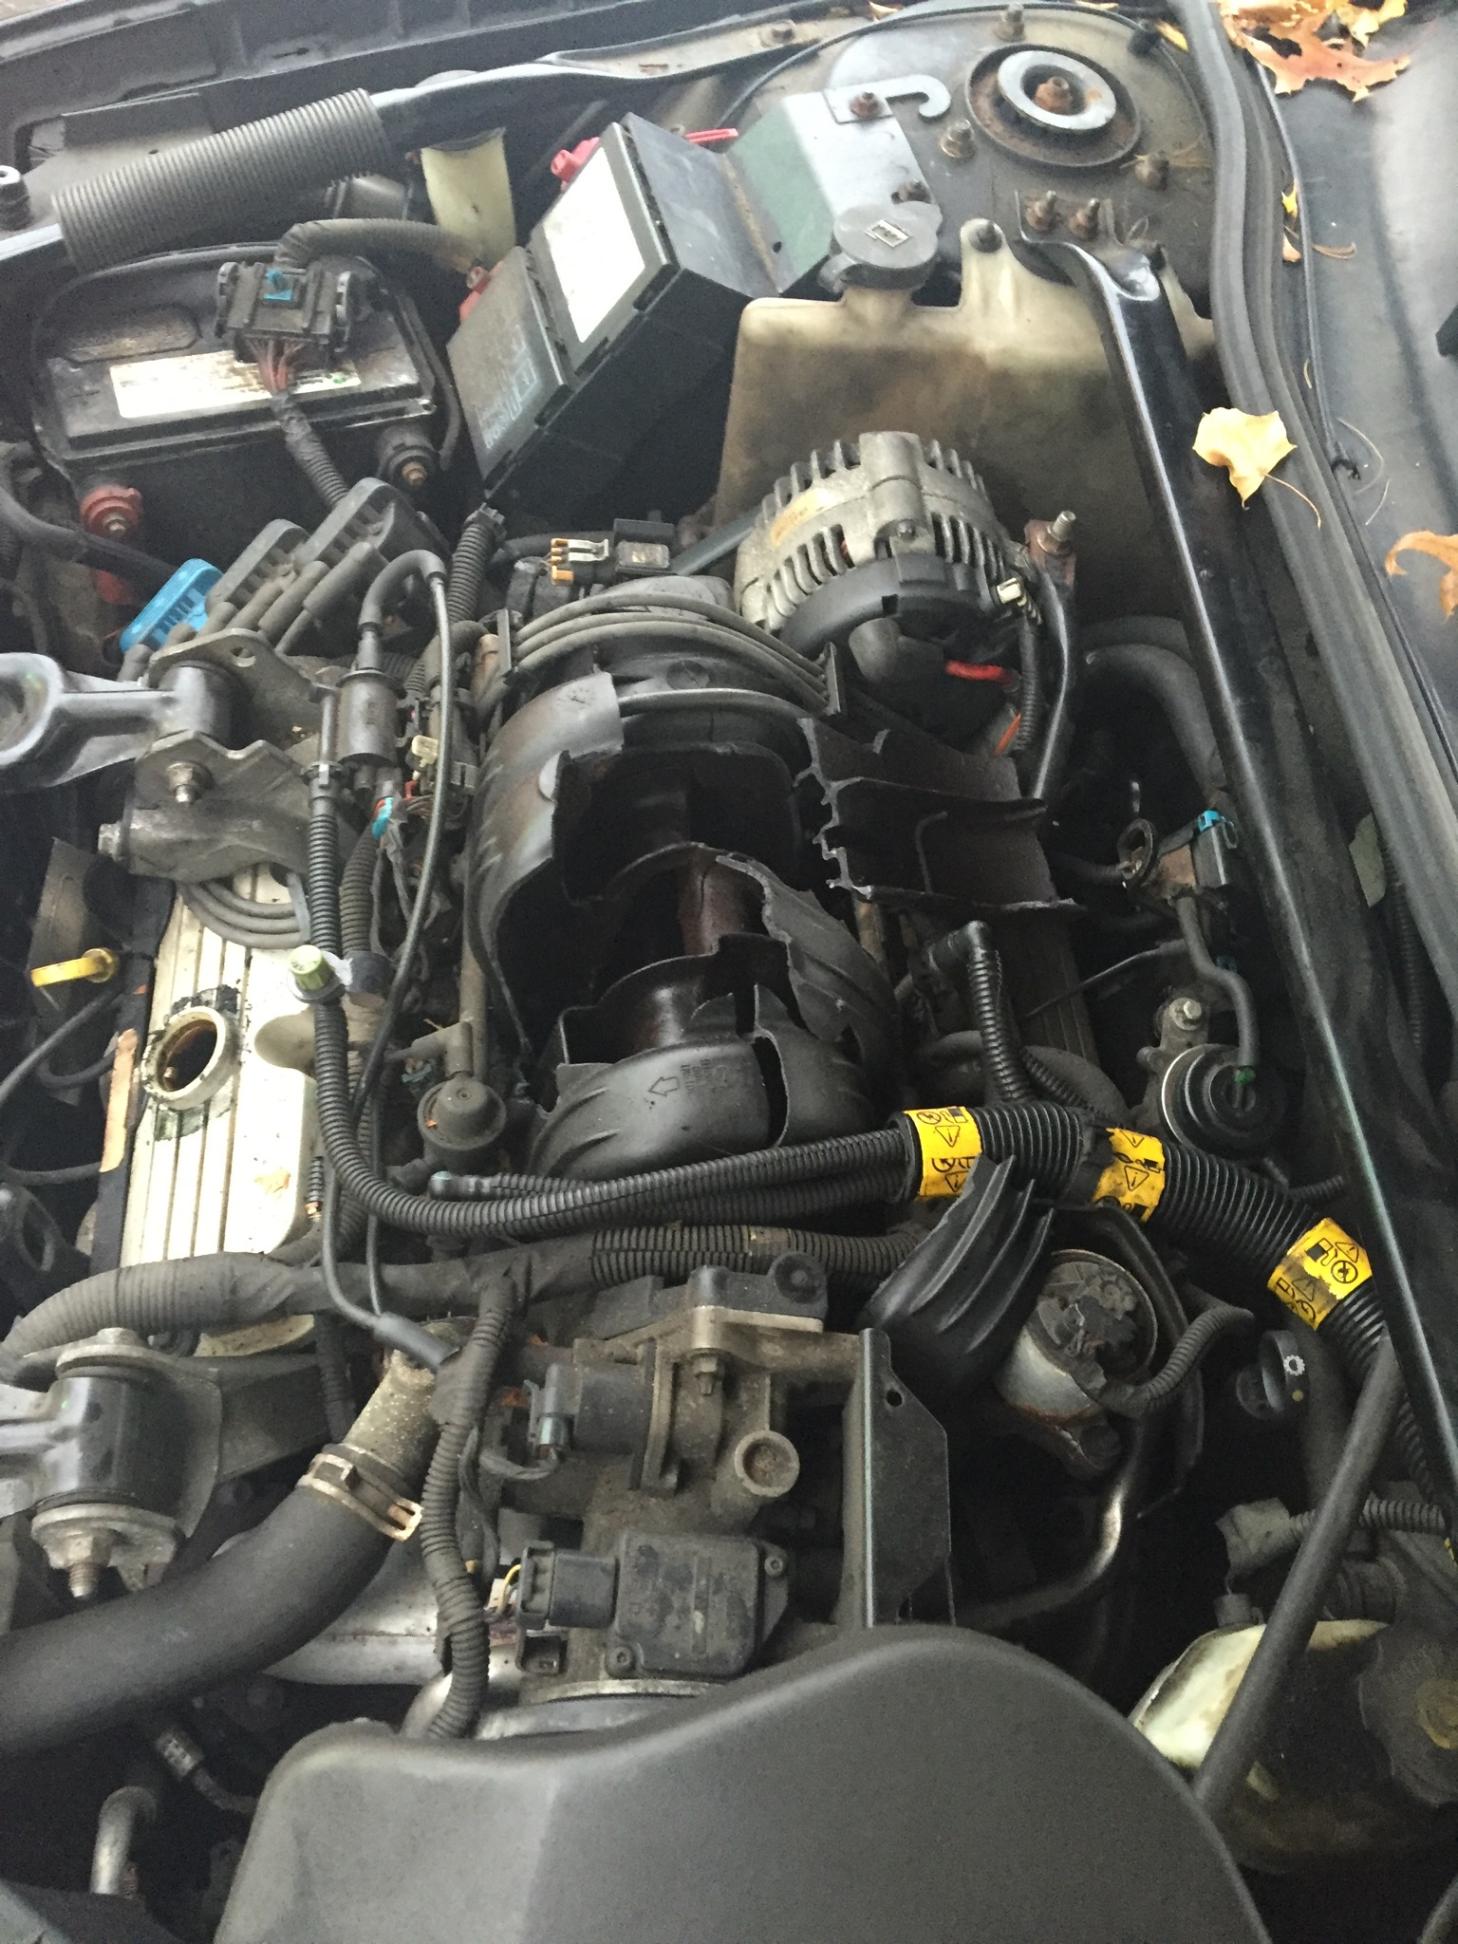 Intake Manifold Exploded - GM Forum - Buick, Cadillac ... wiring diagram 2000 buick park avenue 